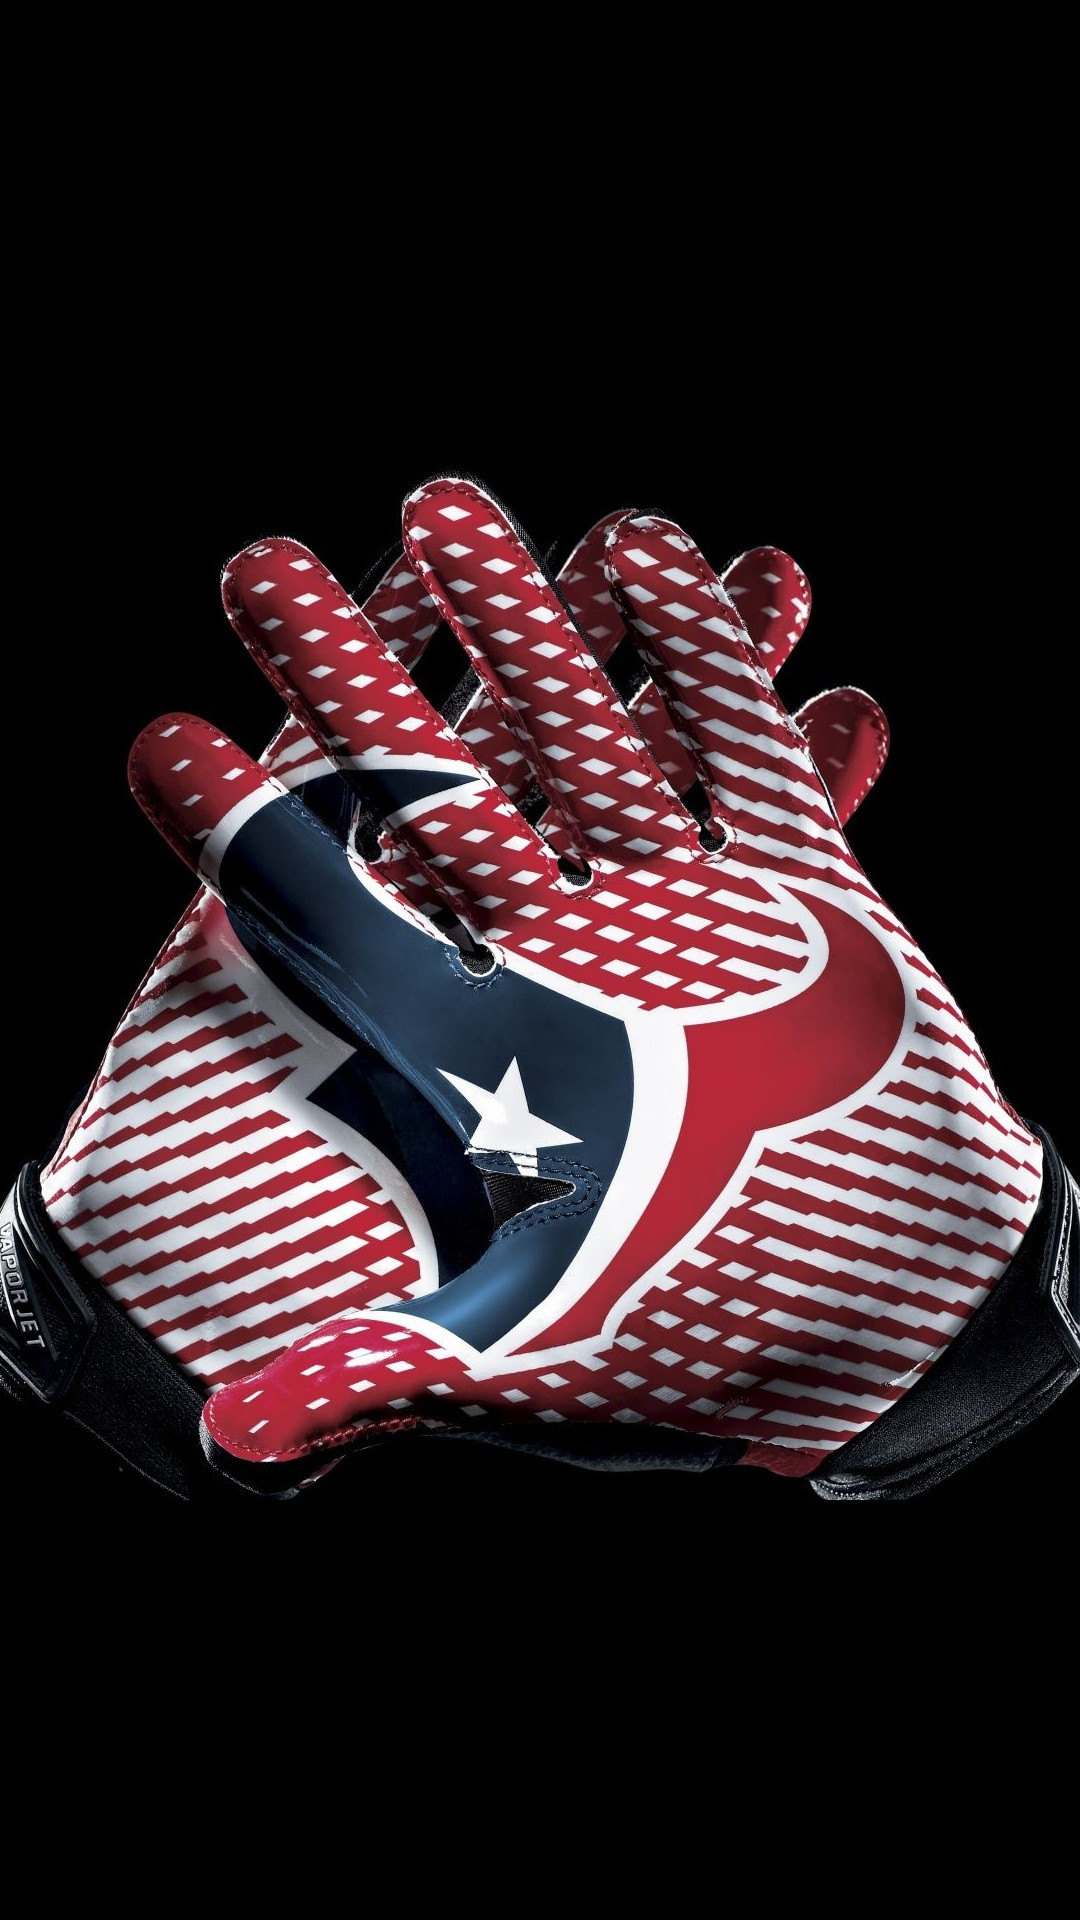 Apple Houston Texans iPhone Wallpaper With high-resolution 1080X1920 pixel. Donwload and set as wallpaper for your iPhone X, iPhone XS home screen backgrounds, XS Max, XR, iPhone8 lock screen wallpaper, iPhone 7, 6, SE, and other mobile devices